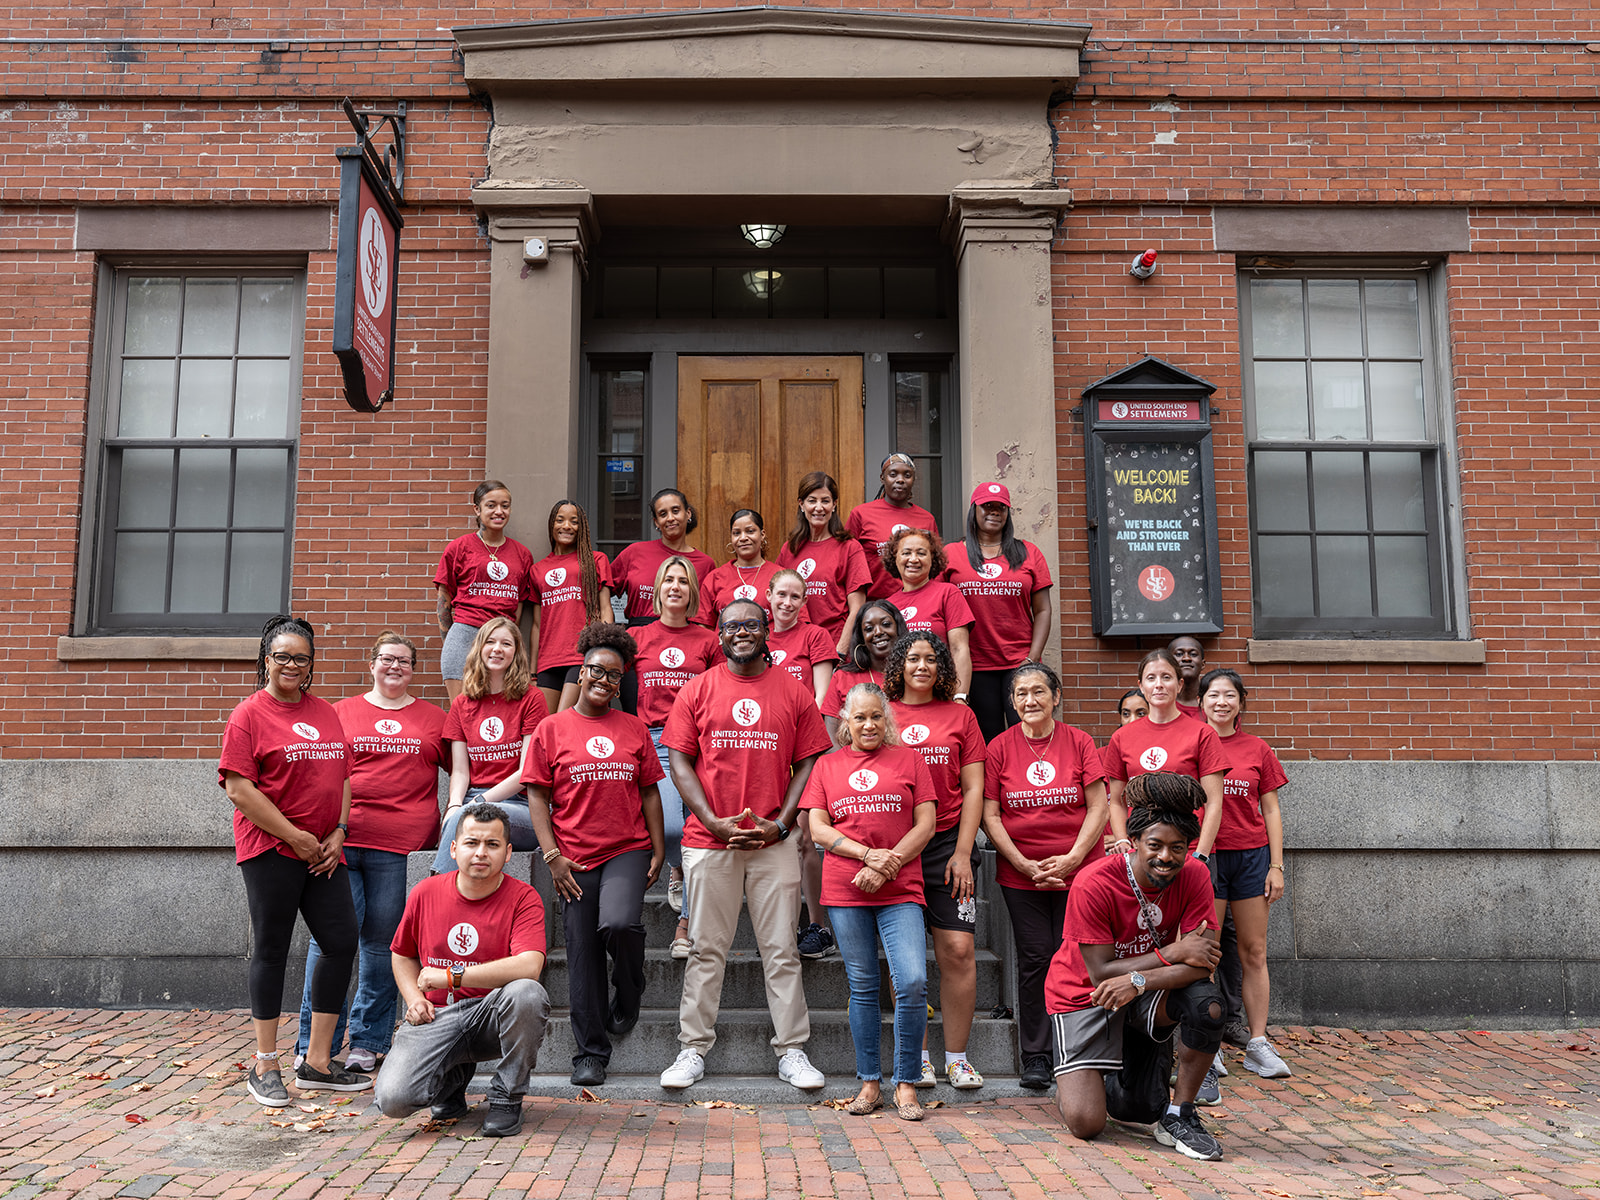 All USES staff in their red USES tshirts posing on the front steps of the building.